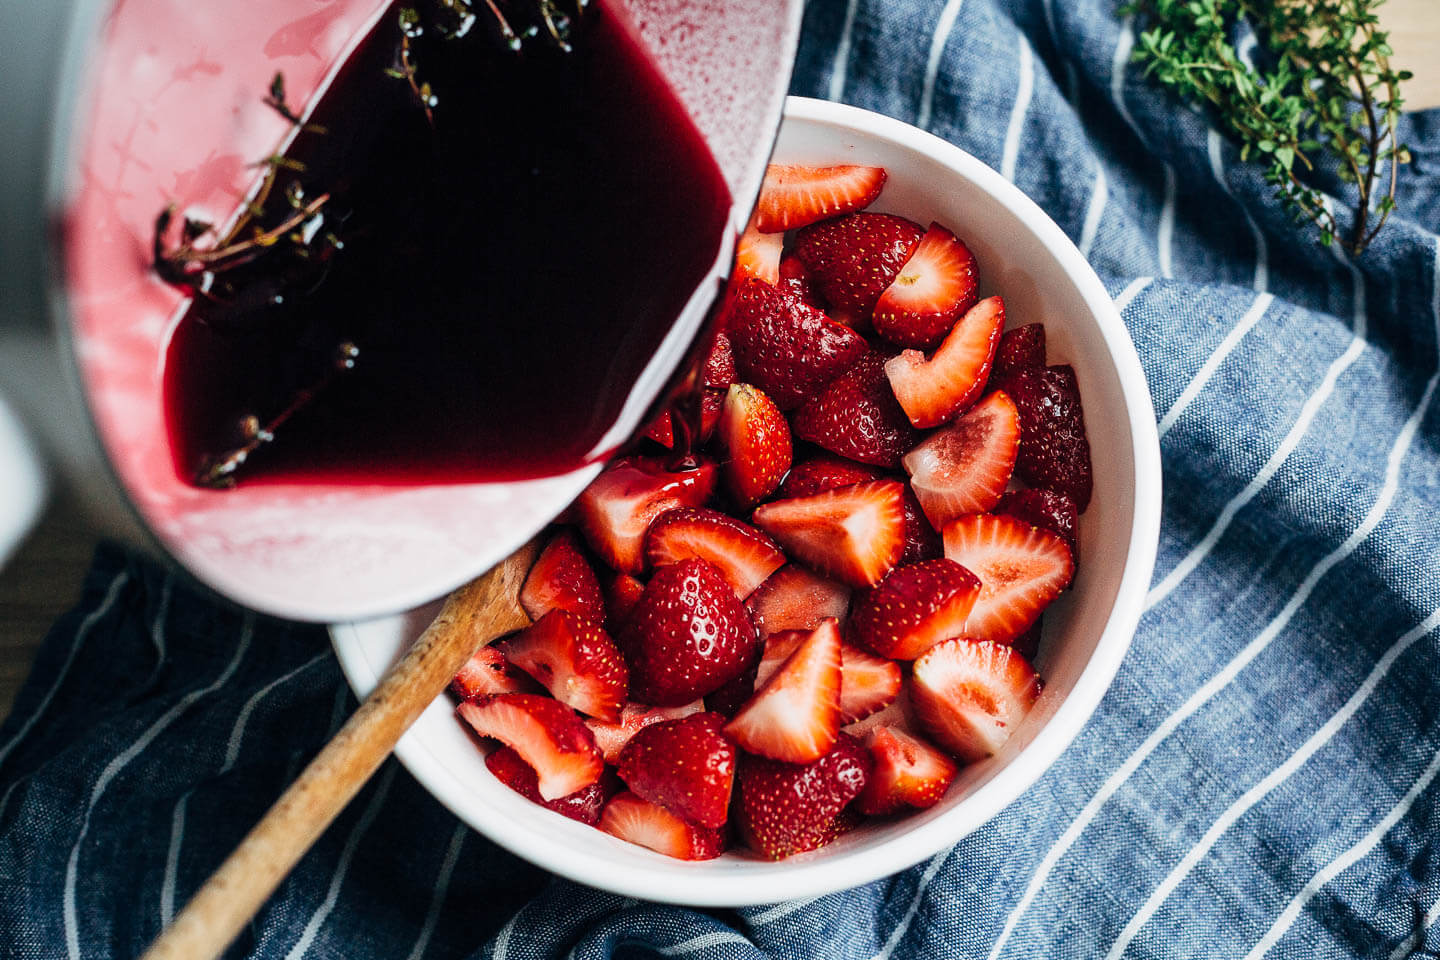 Ripe strawberries in red wine is the kind of effortless summer dessert that we all need more of. With hints of lemon and fresh thyme, the red wine reduction melds beautifully with ripe strawberries and is perfect spooned over vanilla ice cream. 